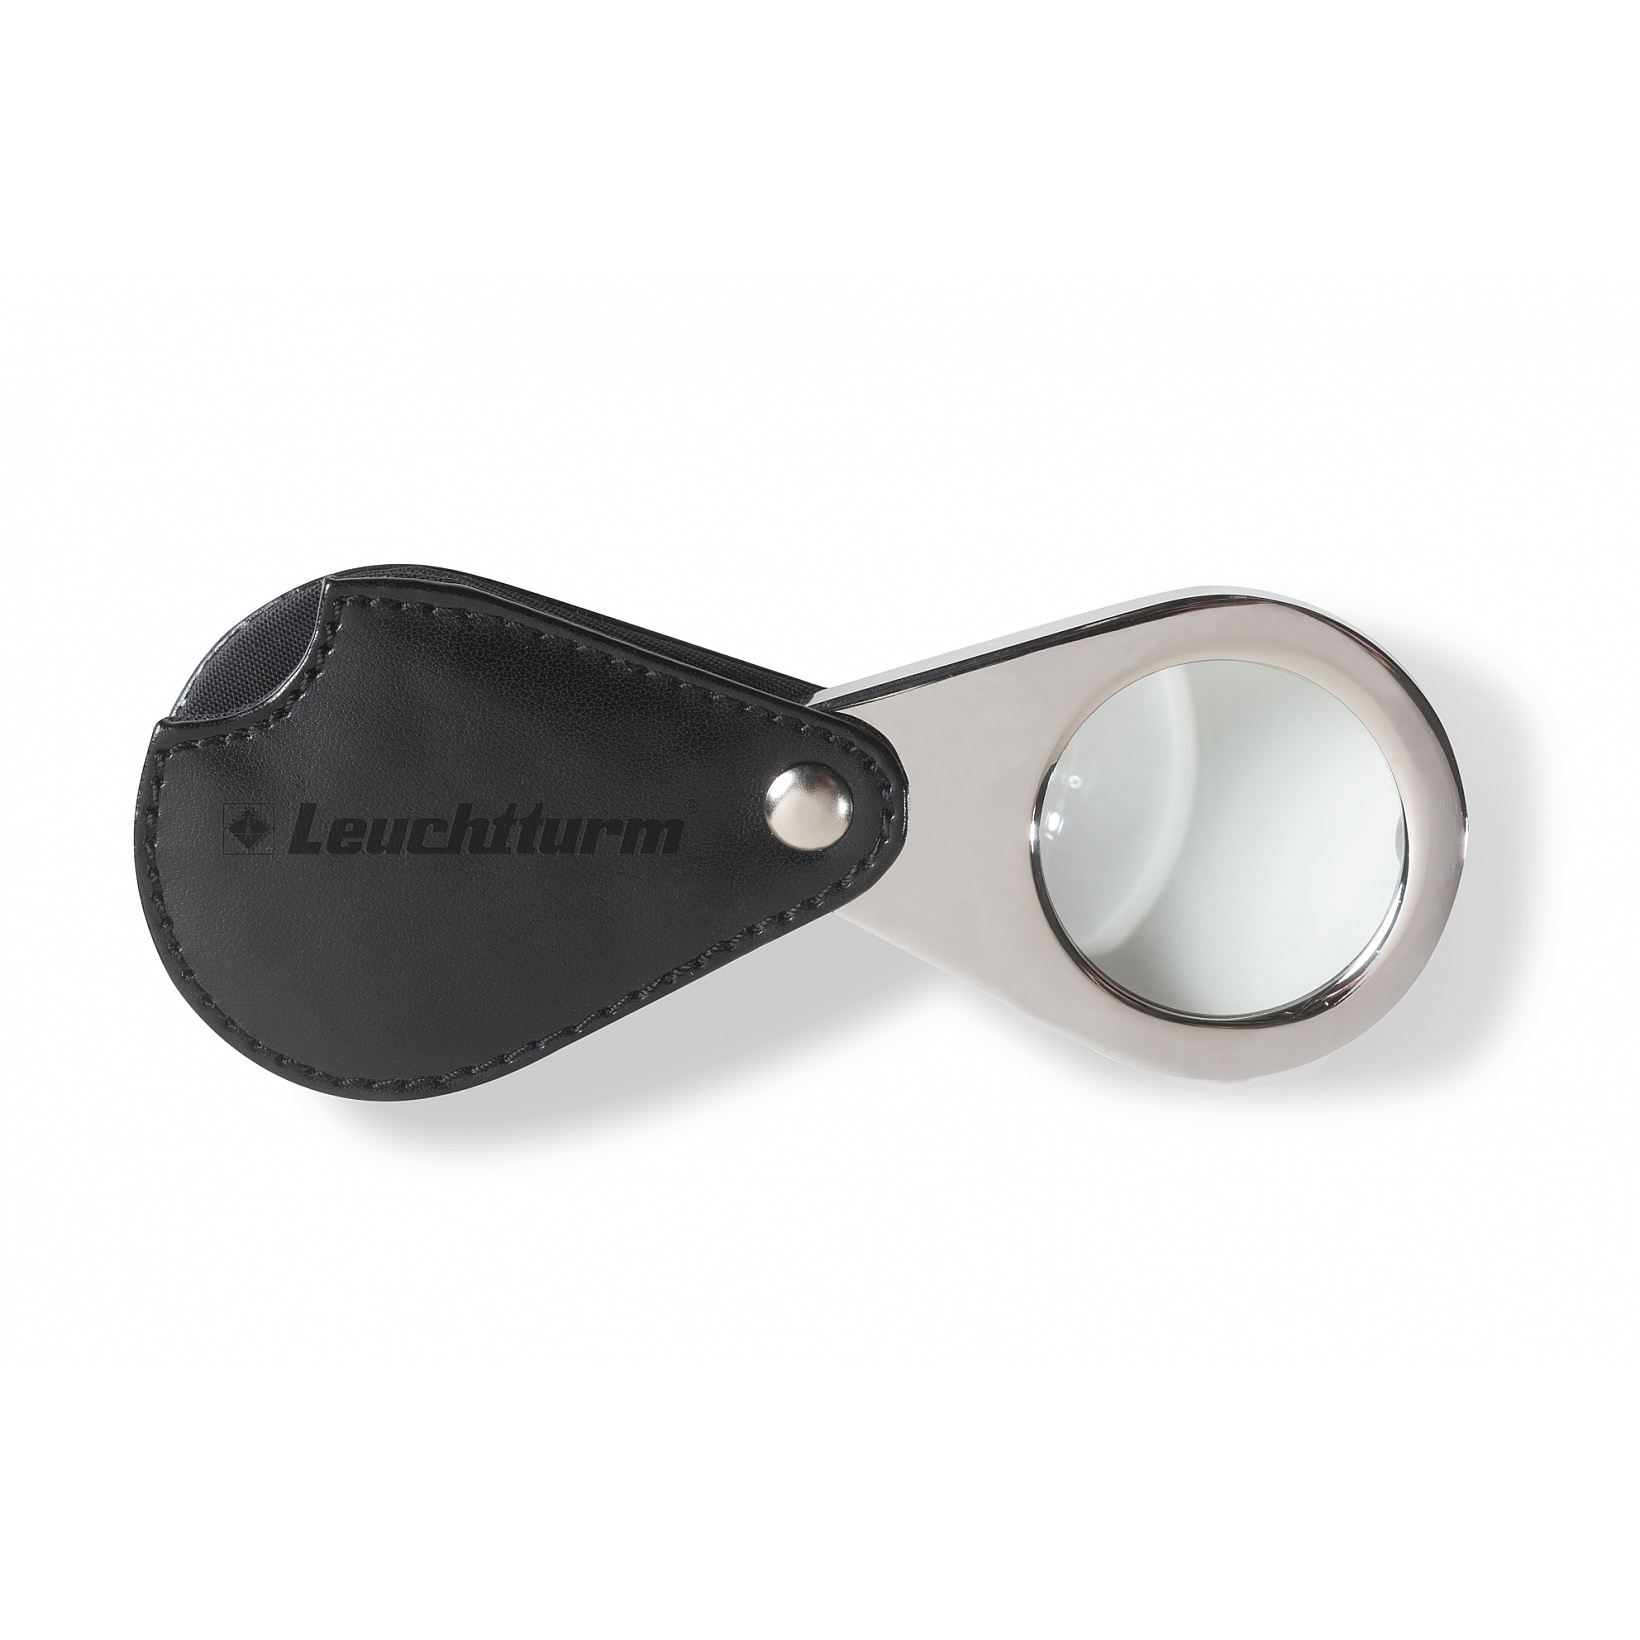 lu25-foldaway-pocket-magnifier-with-3x-magnification-and-black-leather-protective-case